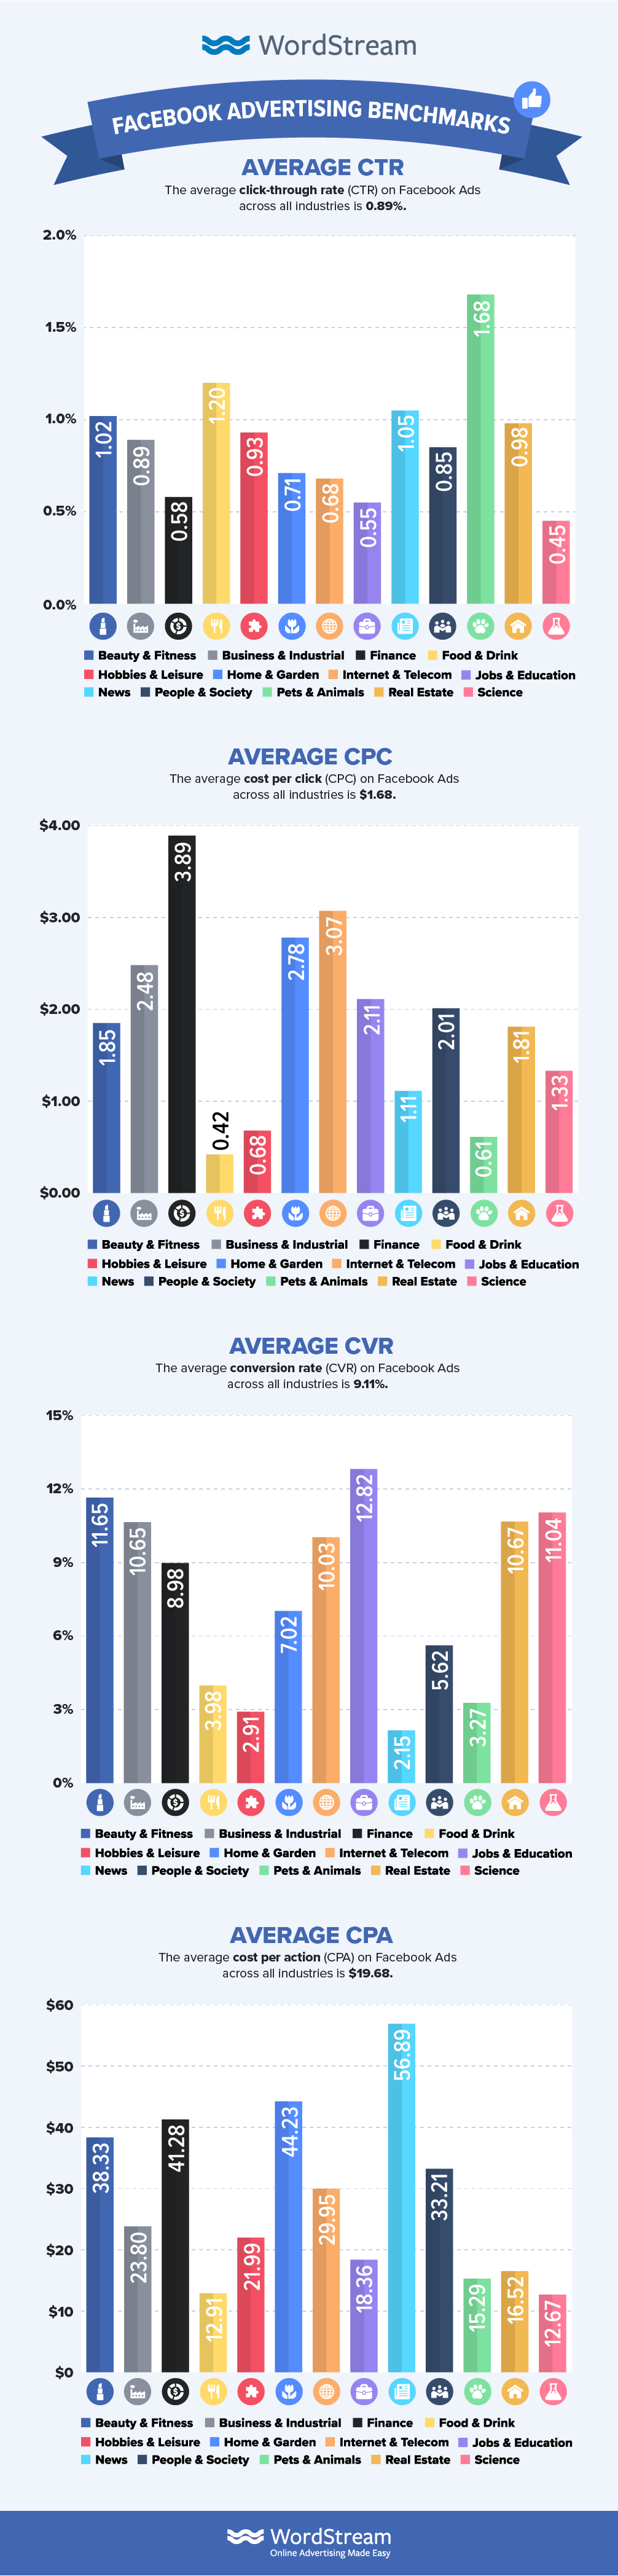 the complete facebook benchmarks for 2019